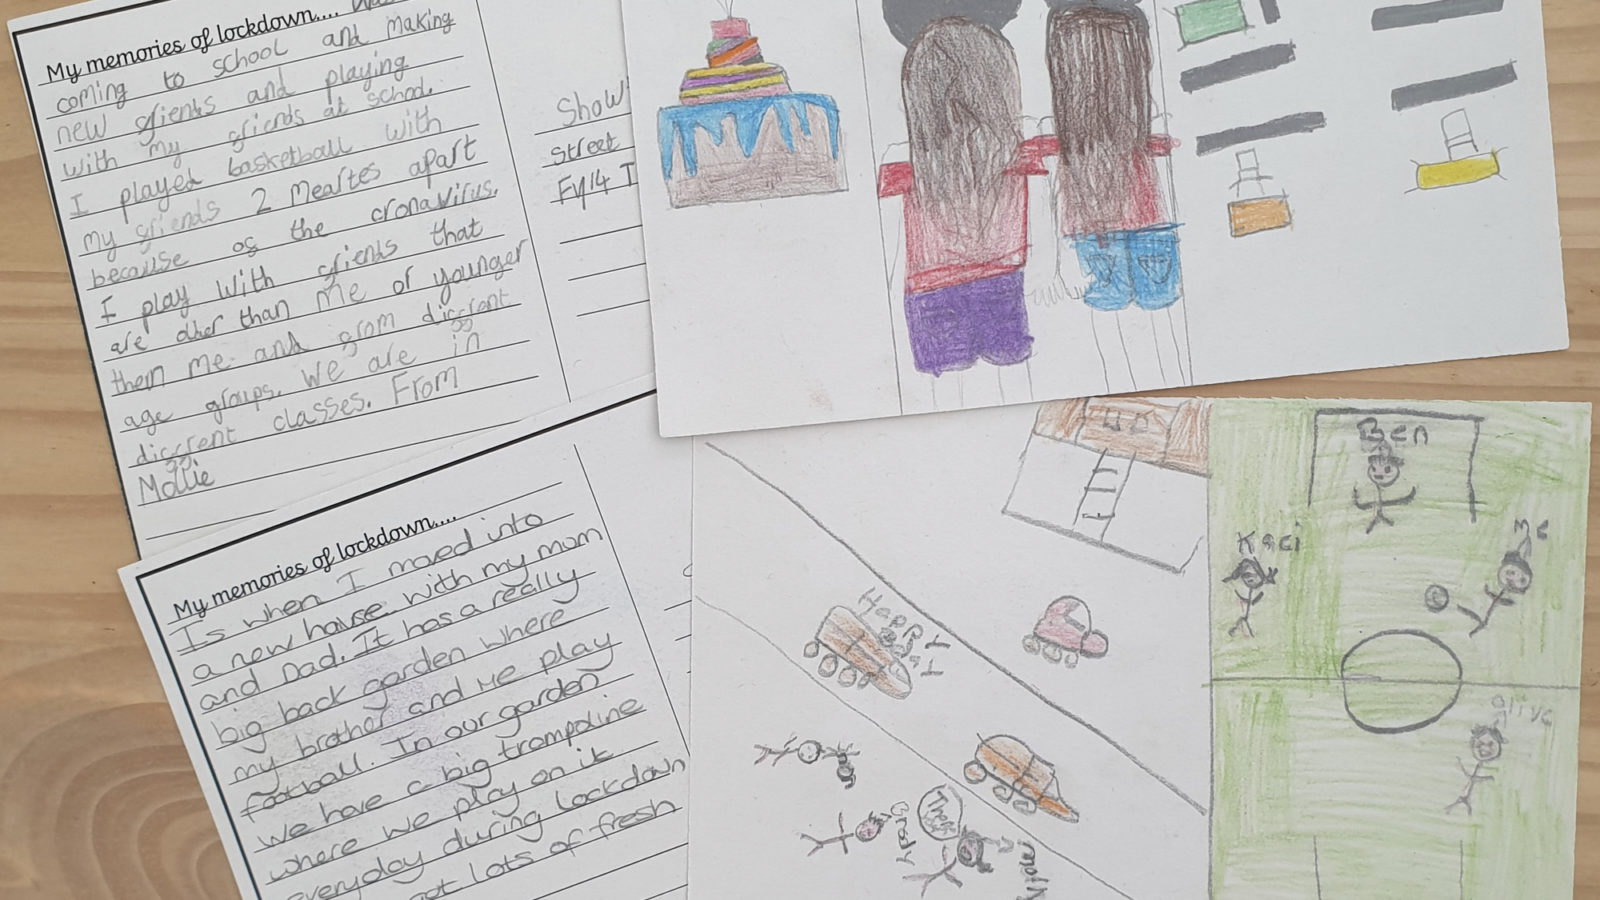 A group of post cards with children's writings and drawings.